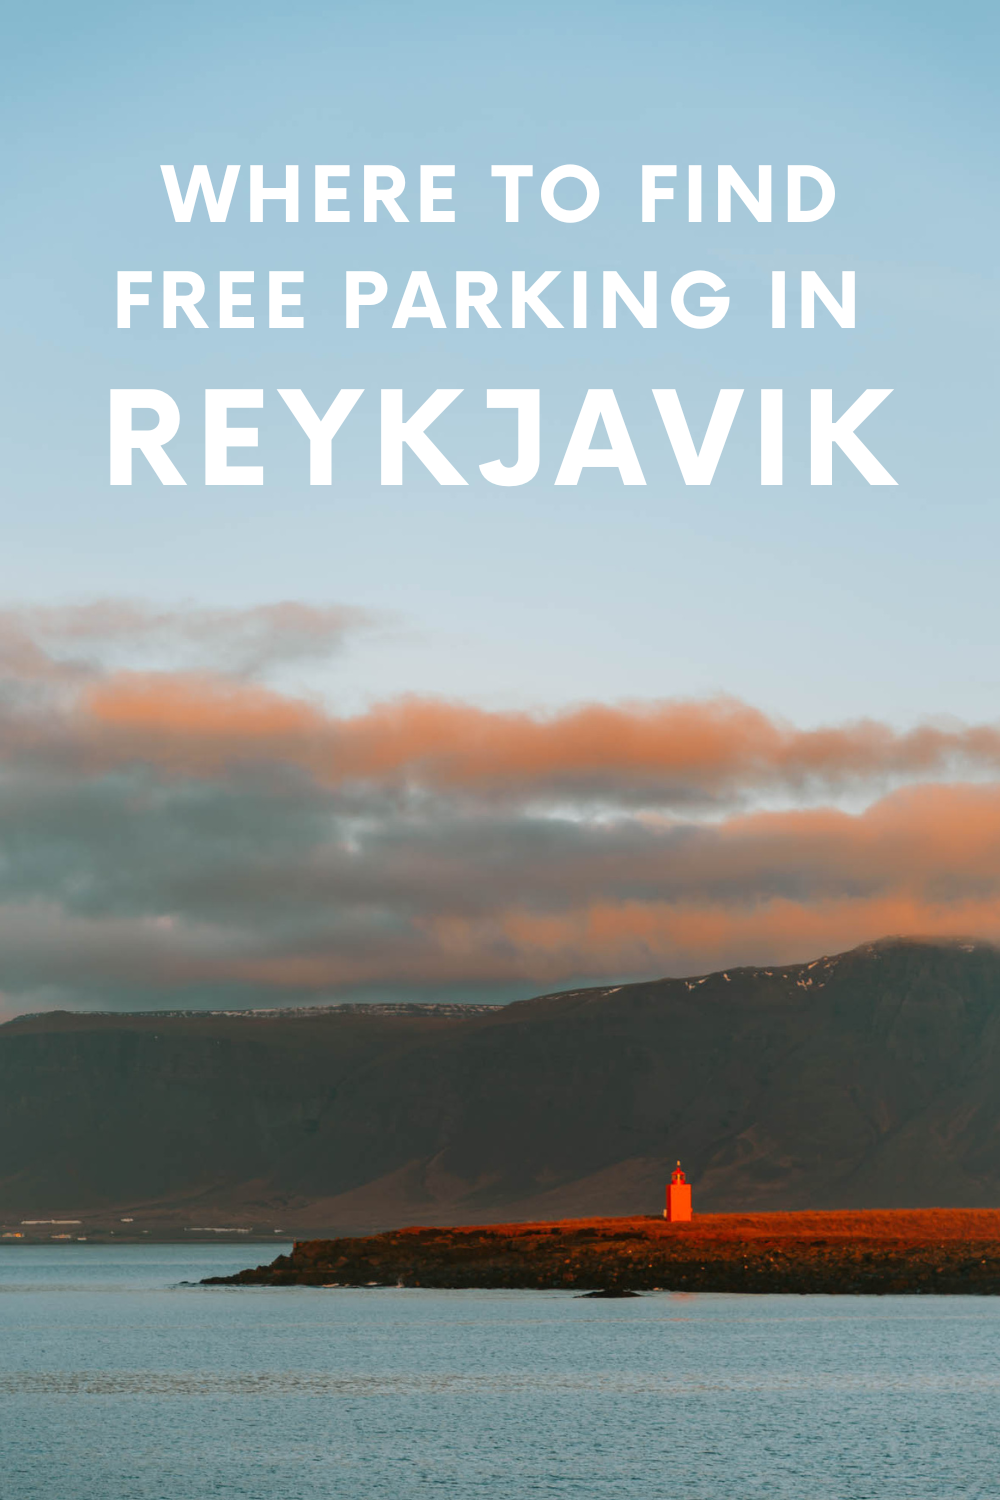 Where to find free parking in Reykjavik